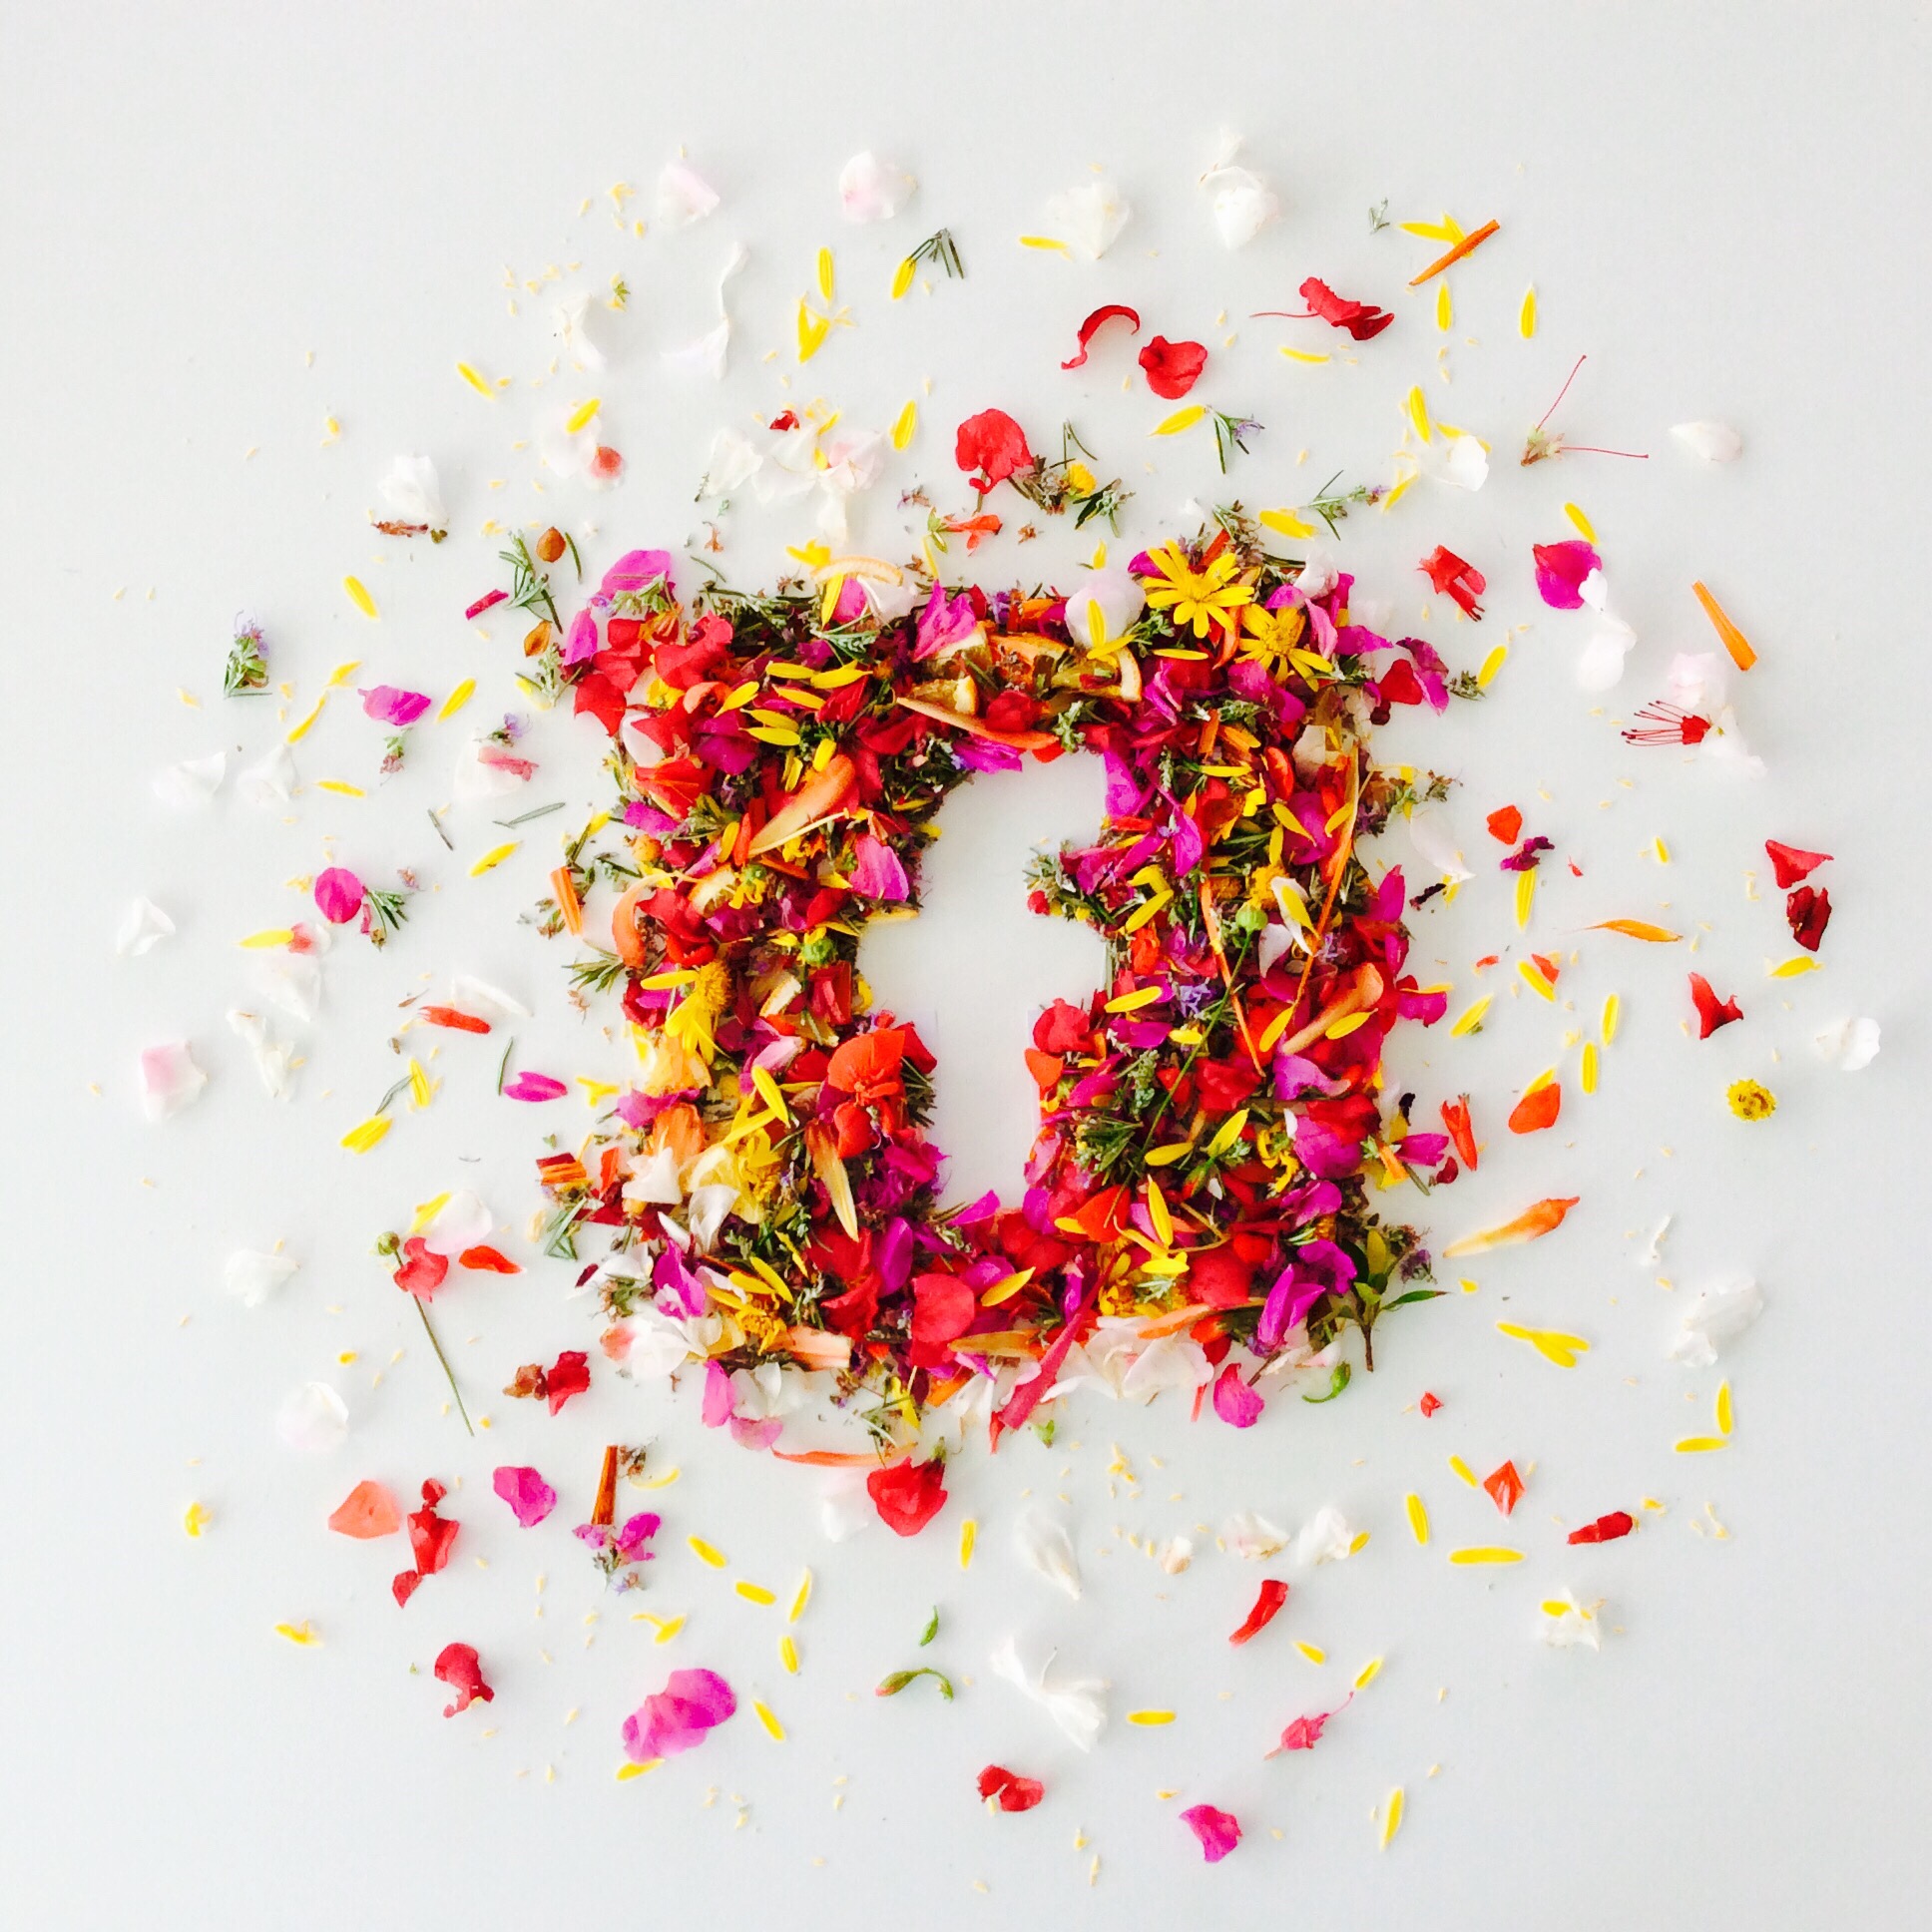 Most marketers love social media platforms like Facebook. Enough to buy flowers? We're not judging.